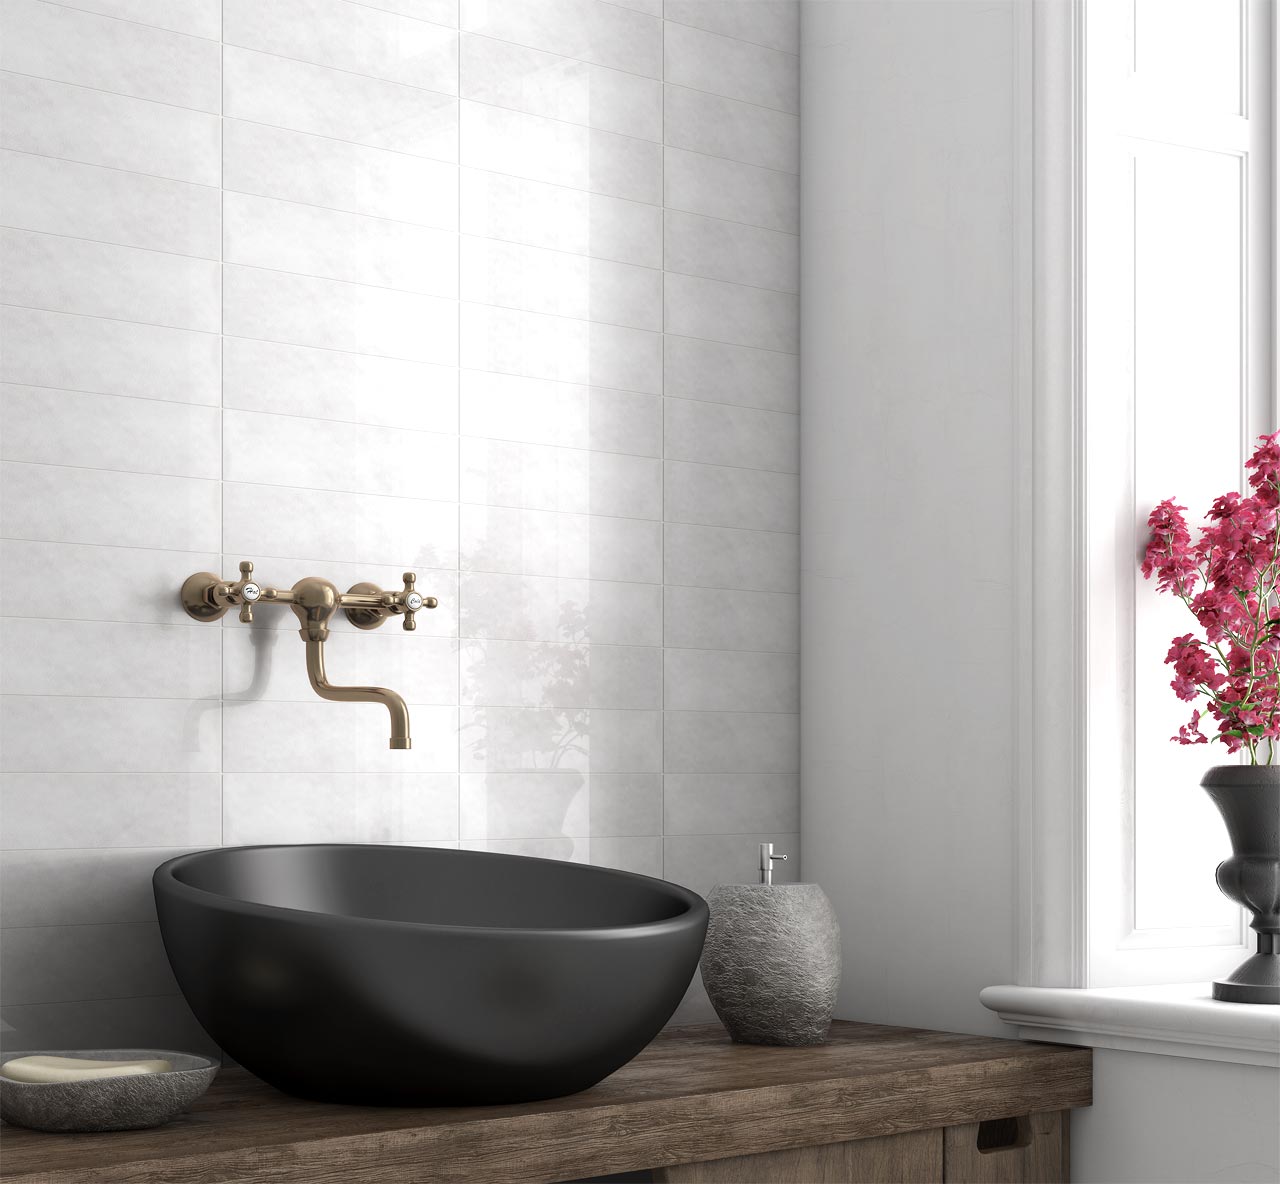 Marakkesh White Gloss Metro Tiles used as white bathroom wall tiles in a small bathroom with a fuchsia pink flower on the windowsill.